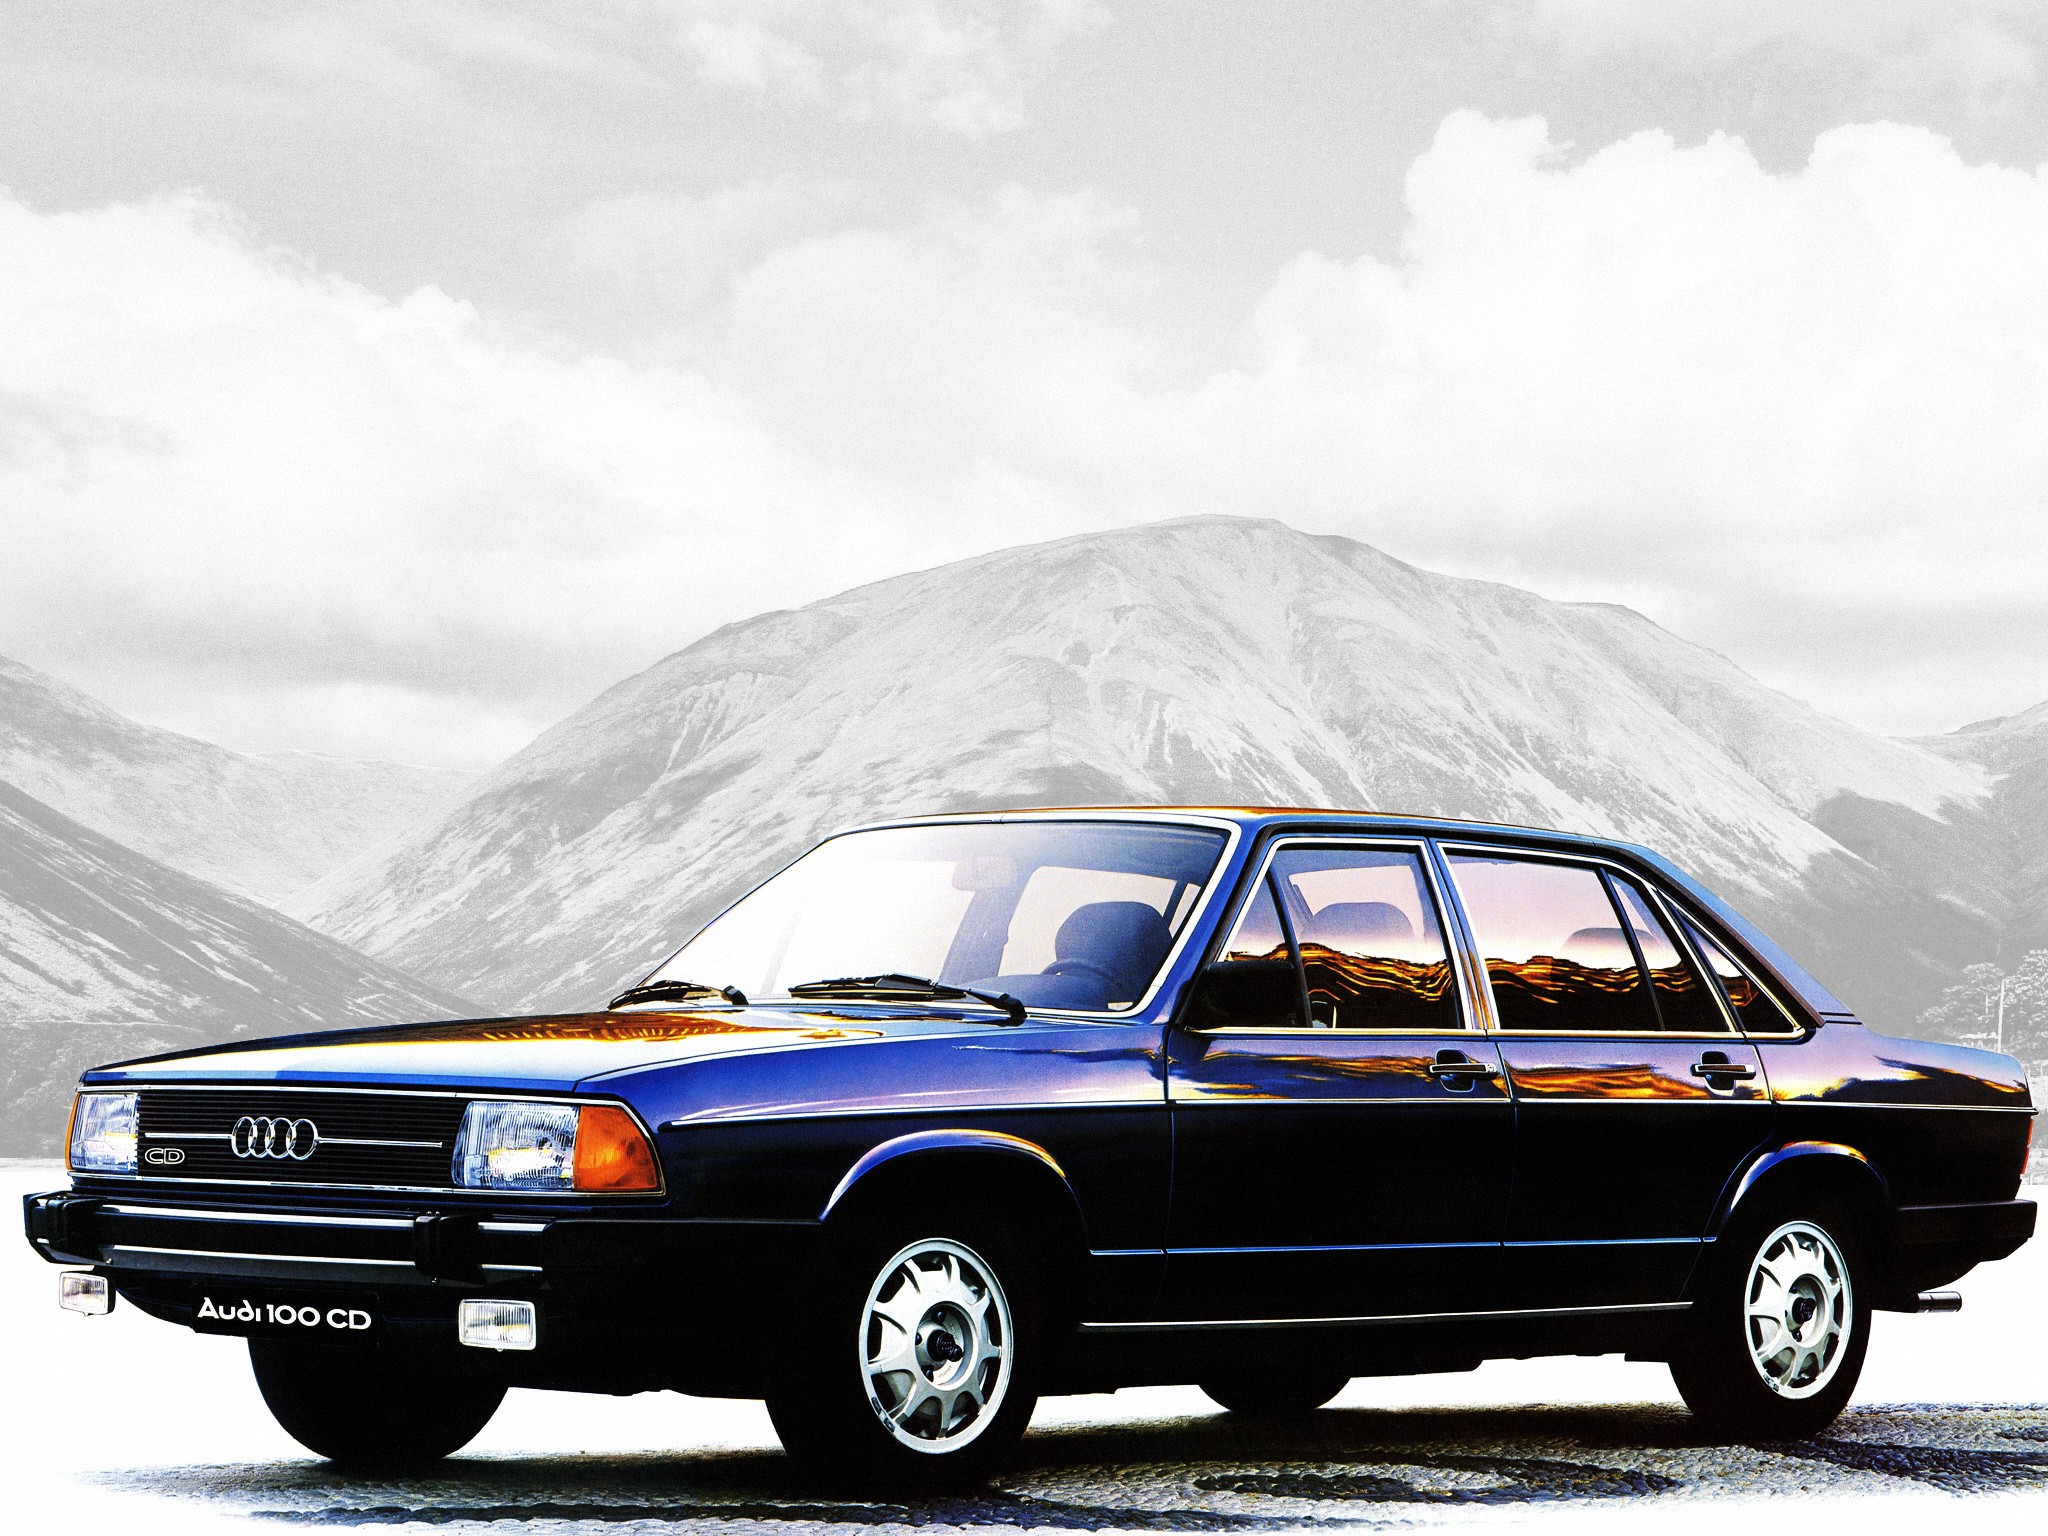 Audi 100 HD Wallpapers and Backgrounds